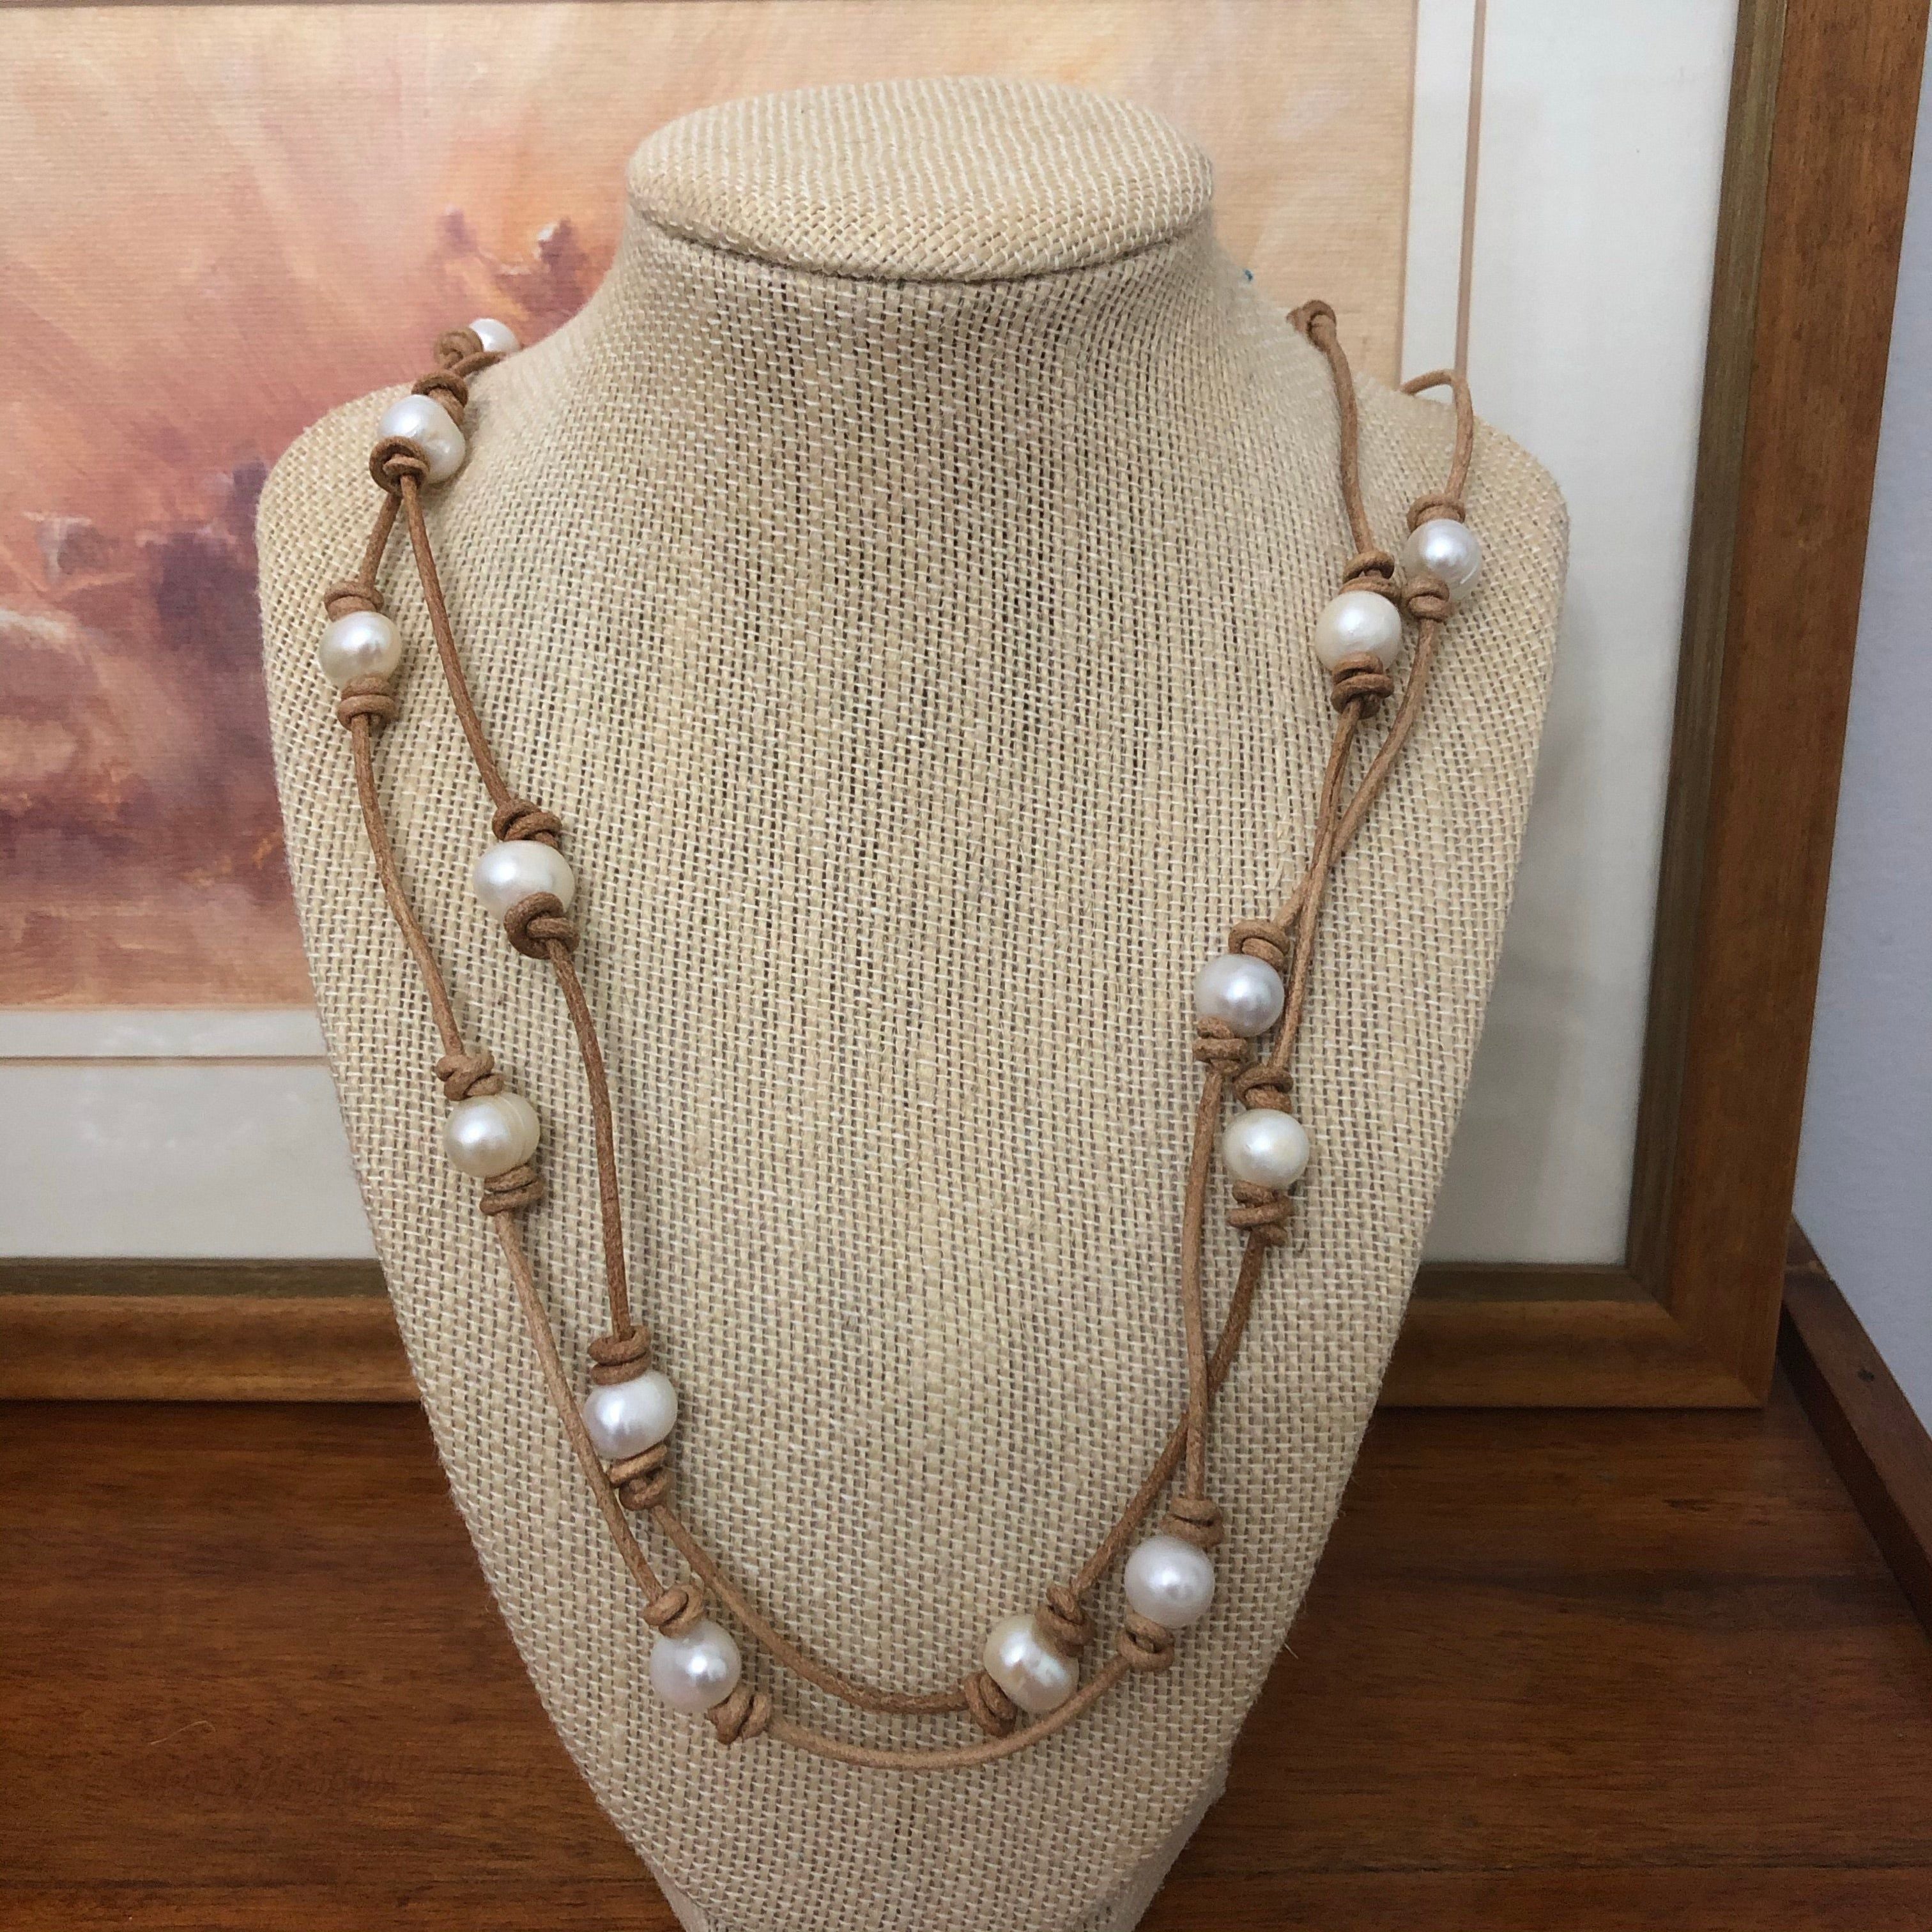 Leather and Pearl Necklace / wrap bracelet light tan  54 inches  